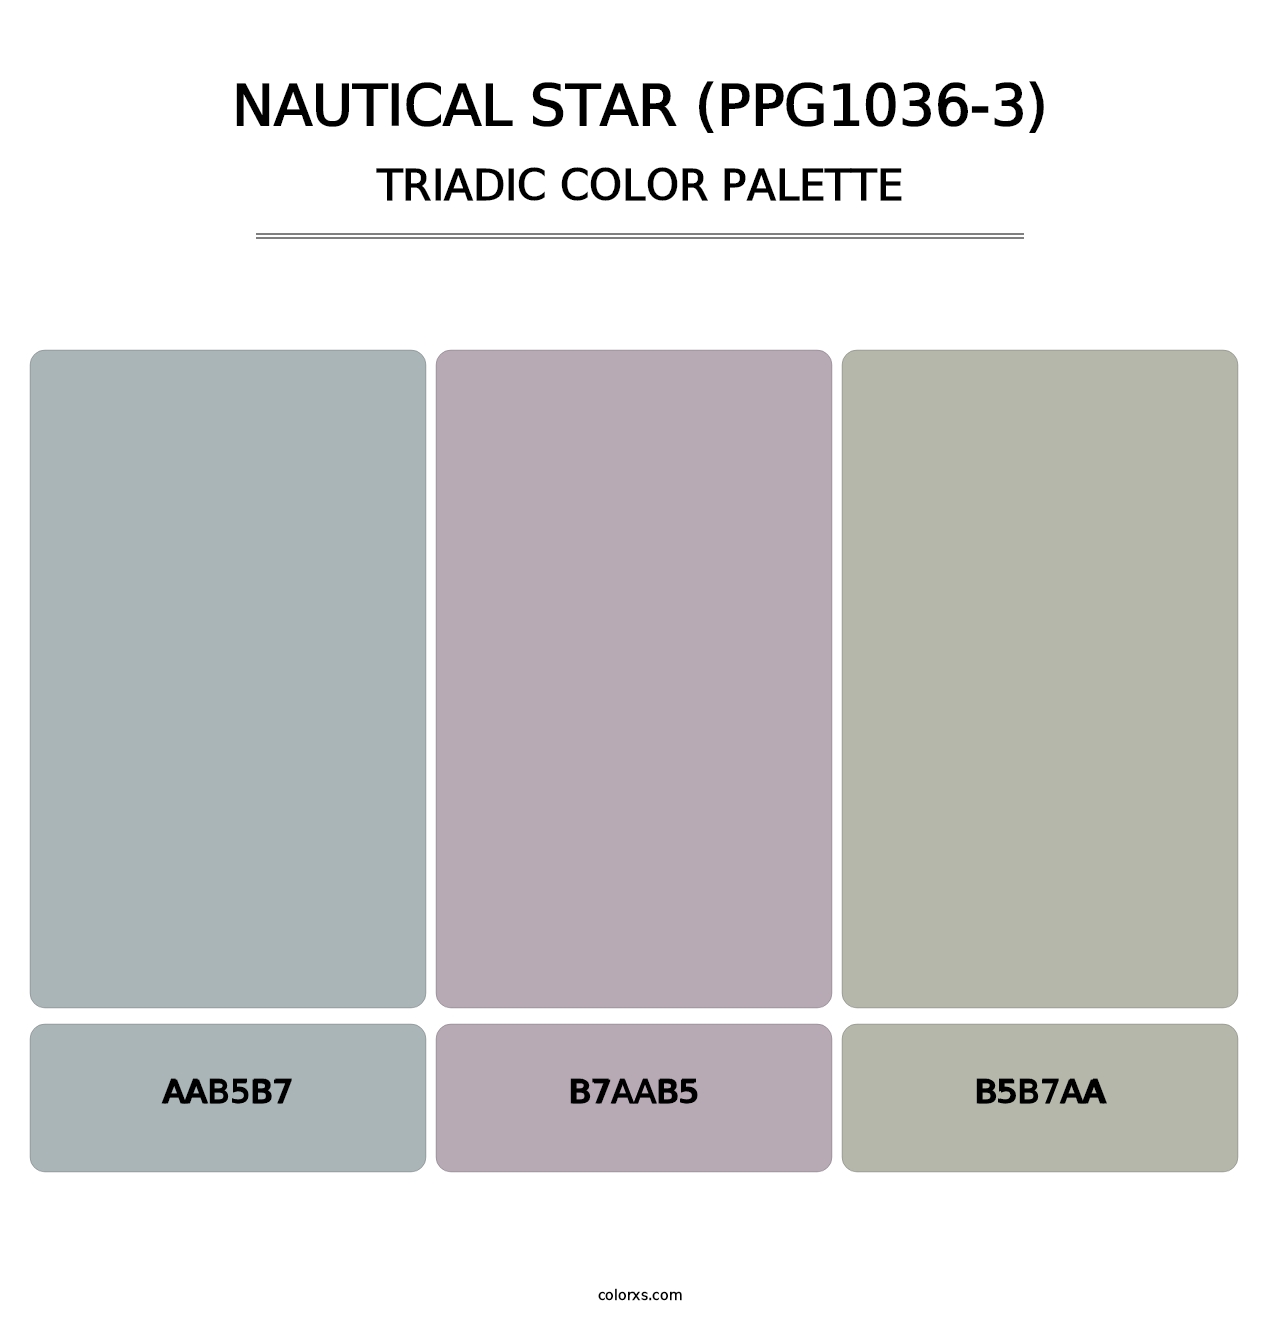 Nautical Star (PPG1036-3) - Triadic Color Palette